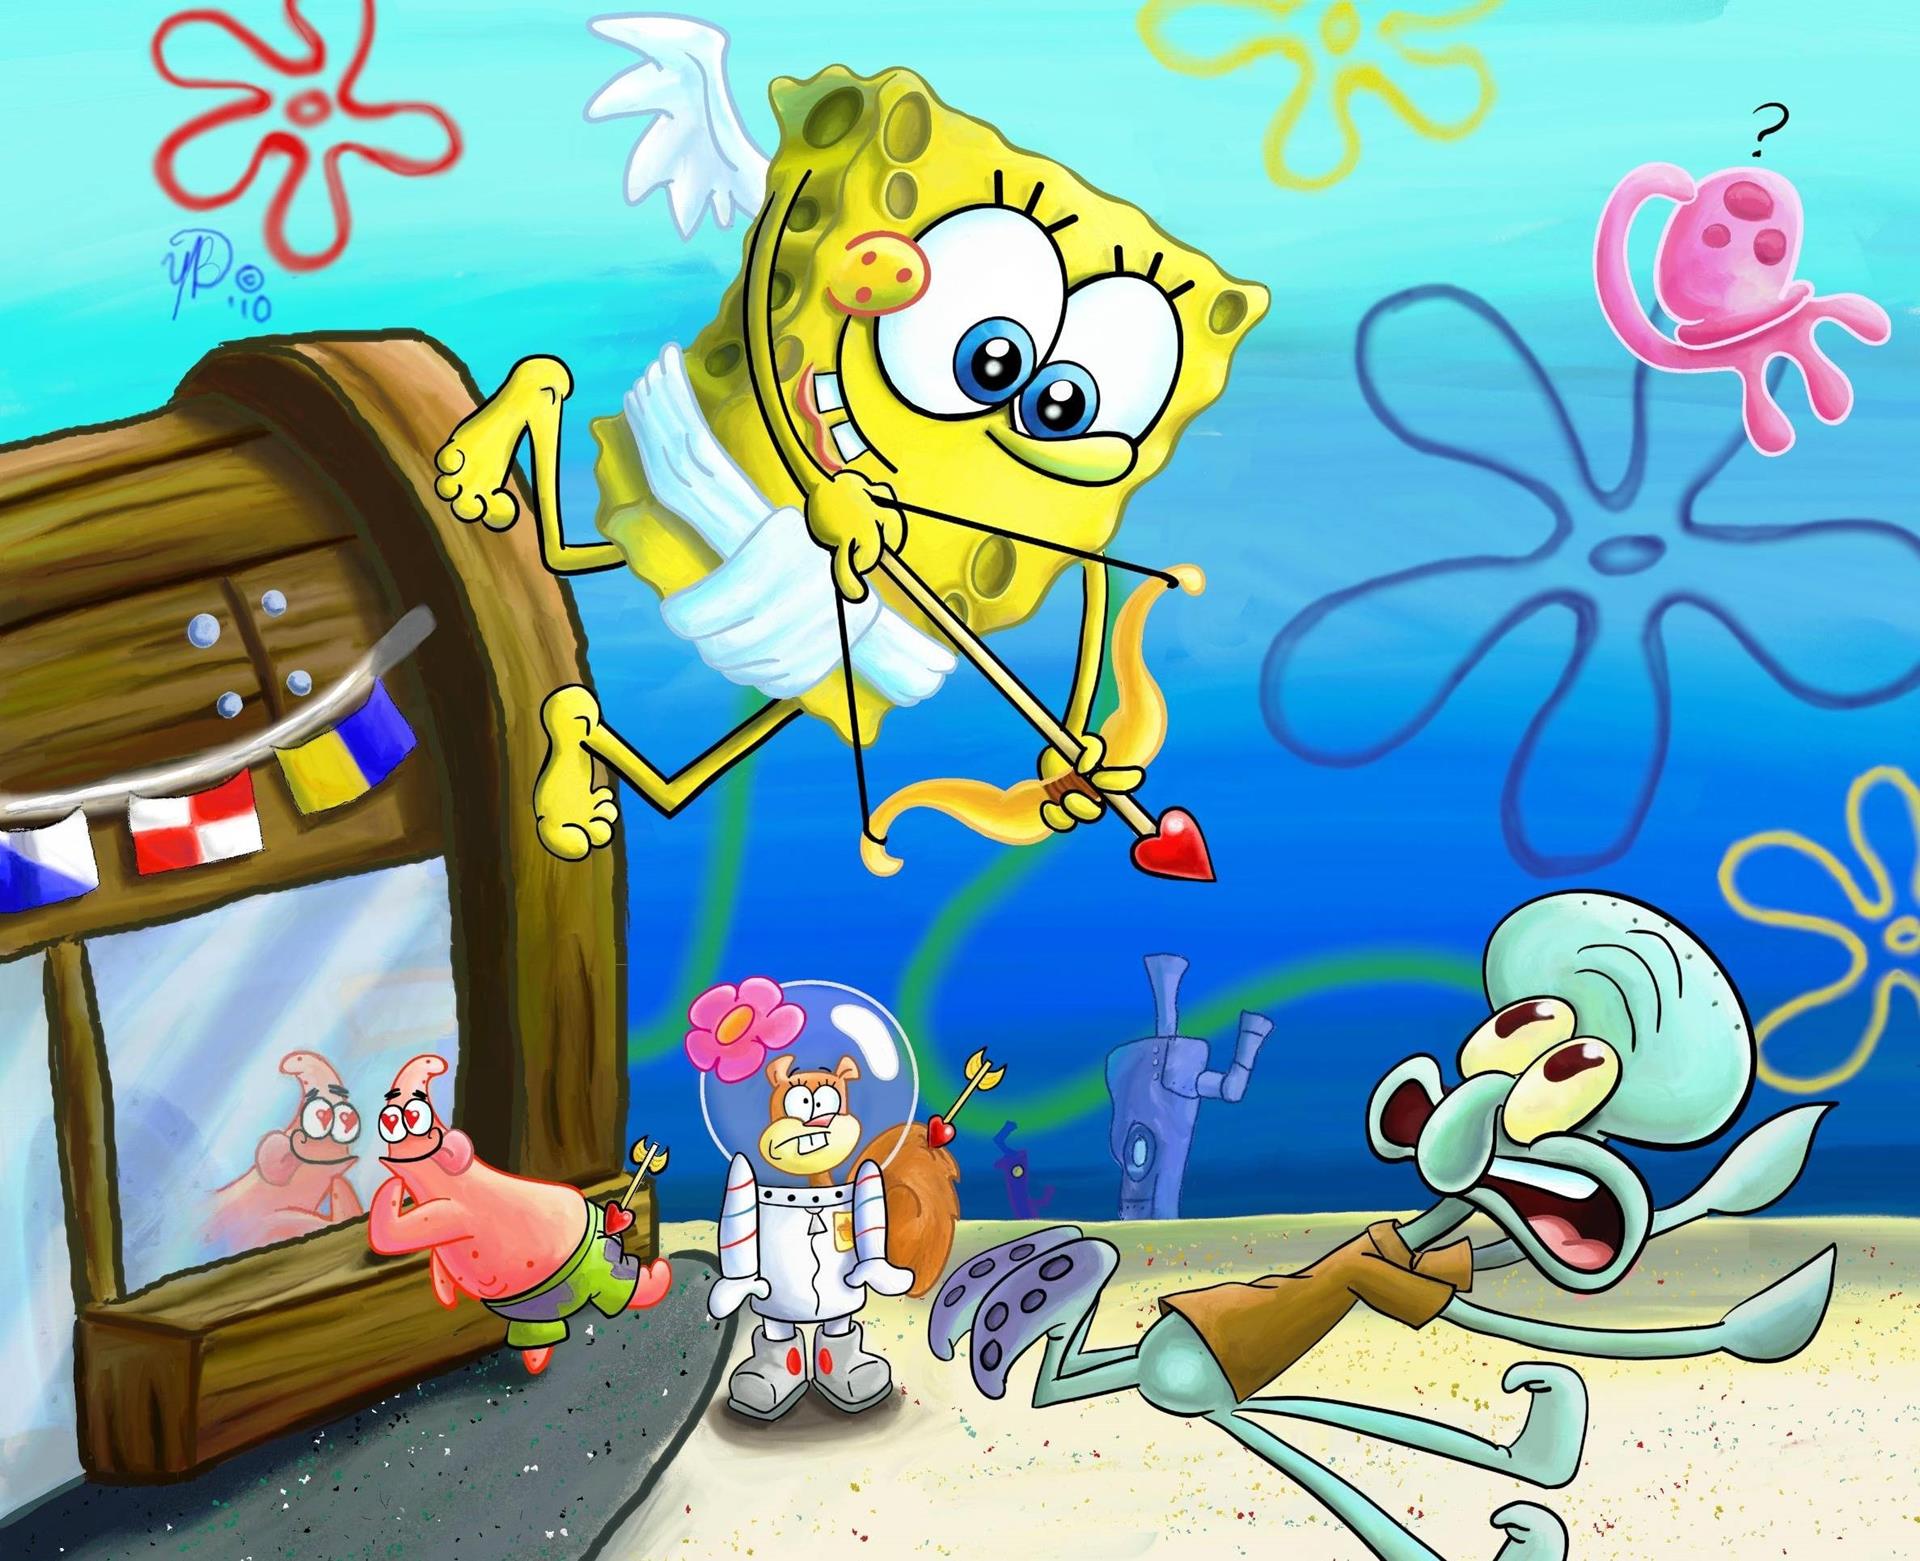 Get awesome Sponge Bob HD images in each new Chrome tab! 